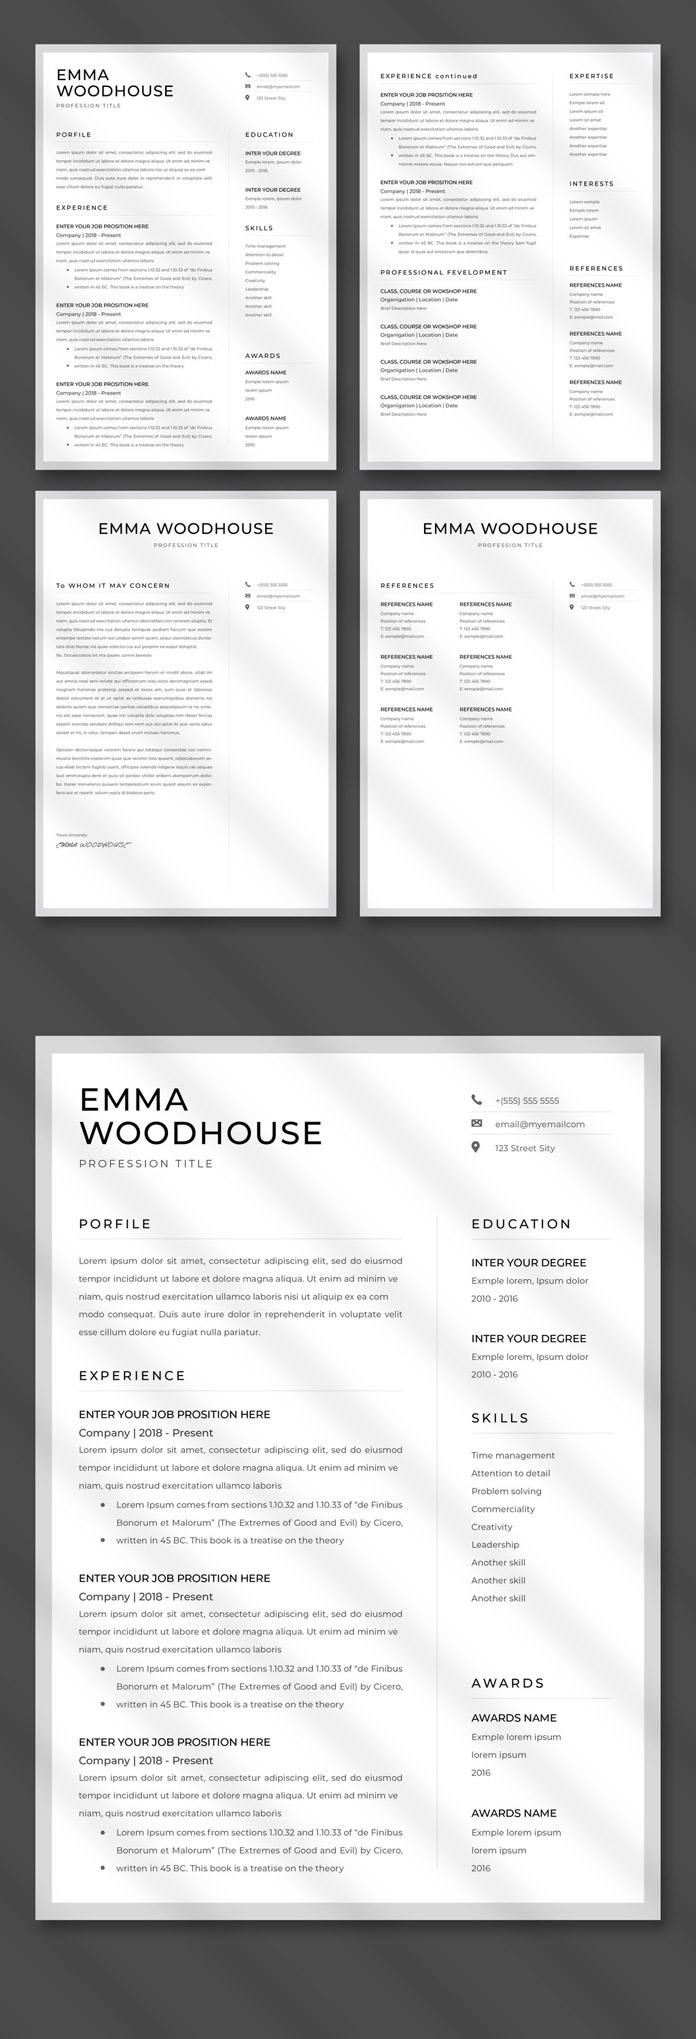 Minimalist Resume Template for Adobe InDesign by PixWork